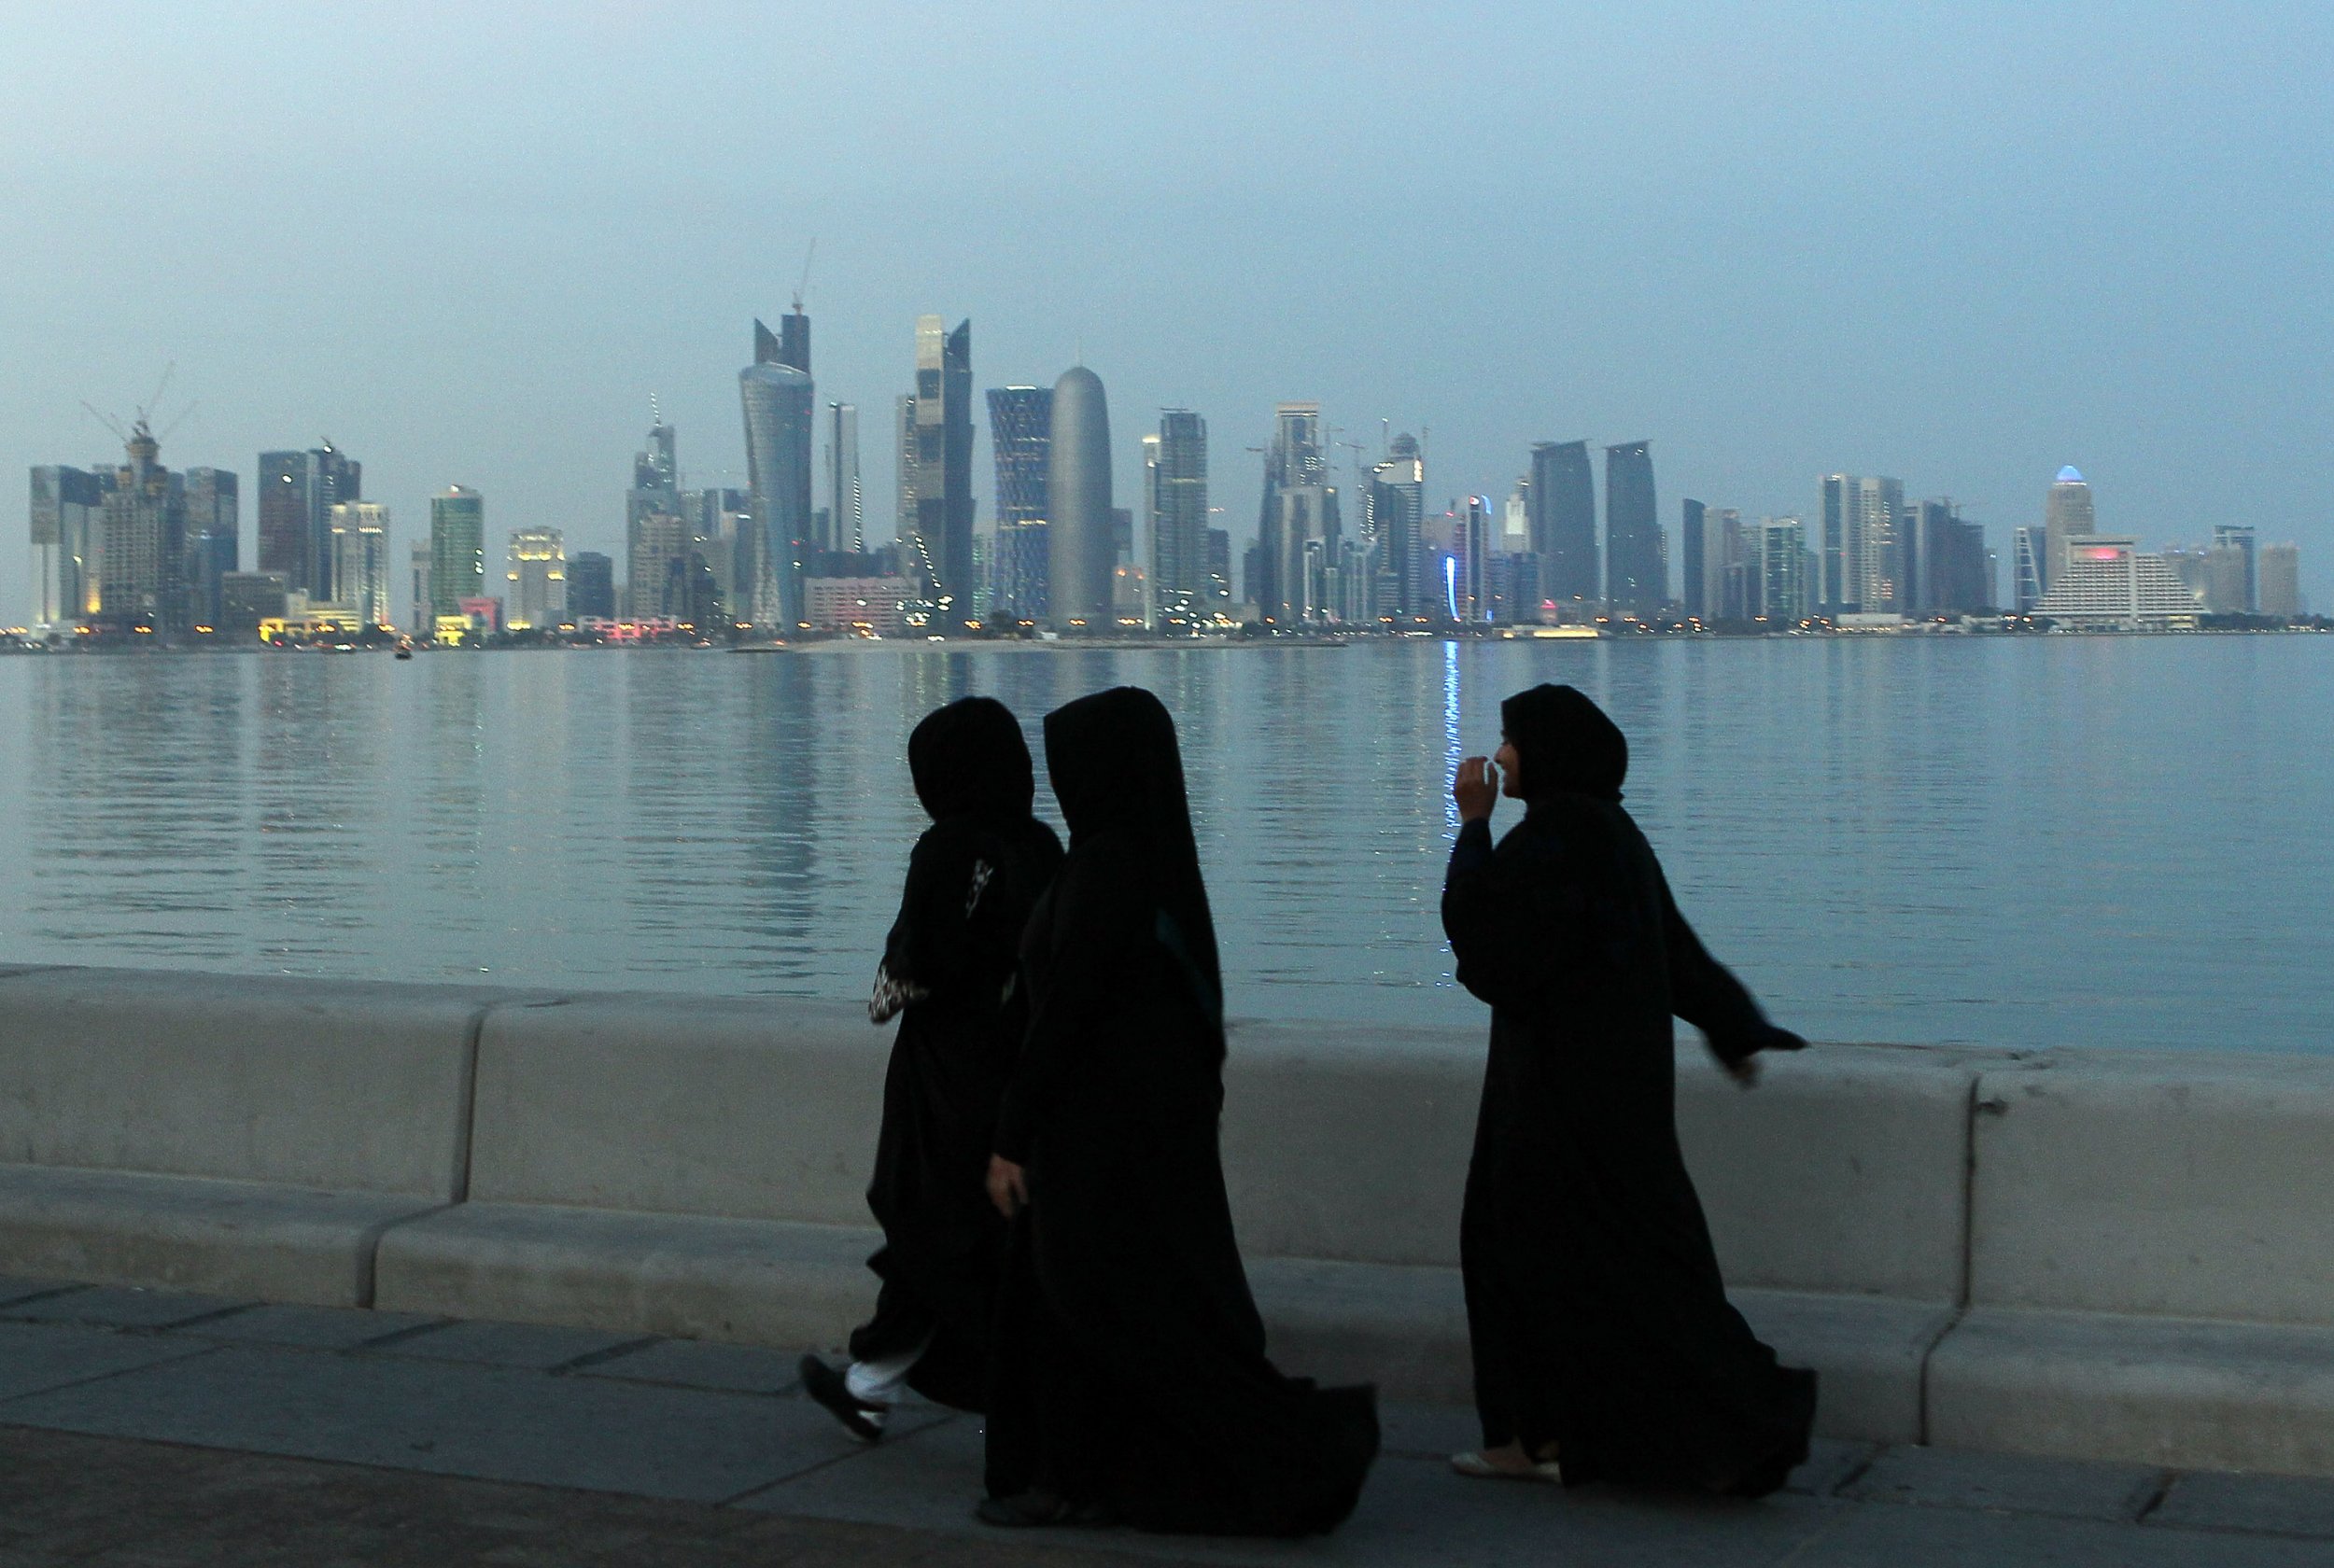 What's Happening With Qatar Crisis? The Blockade Explained One Year On